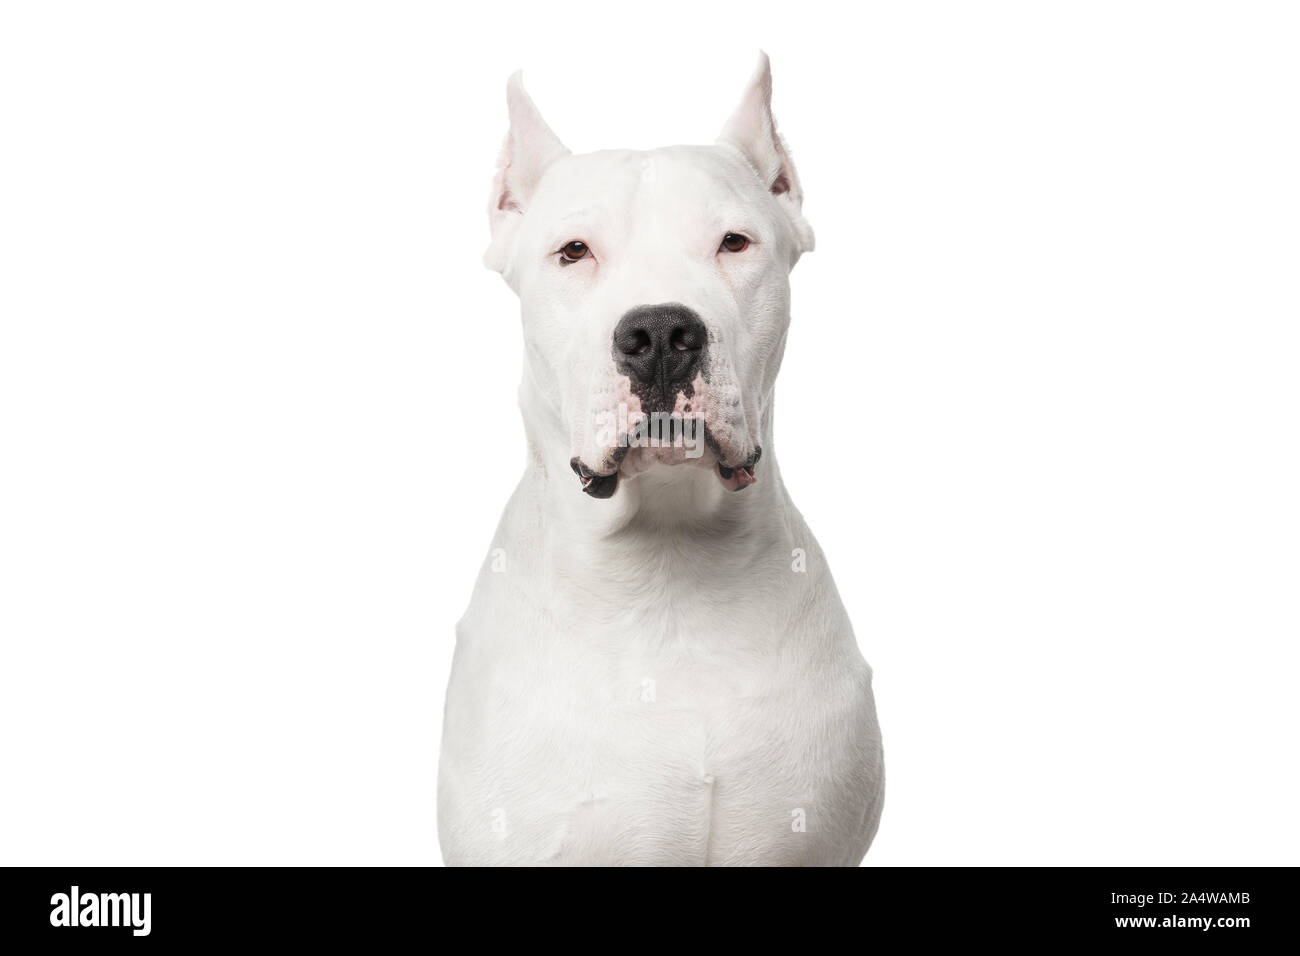 720+ Dogo Argentino Stock Photos, Pictures & Royalty-Free Images - iStock